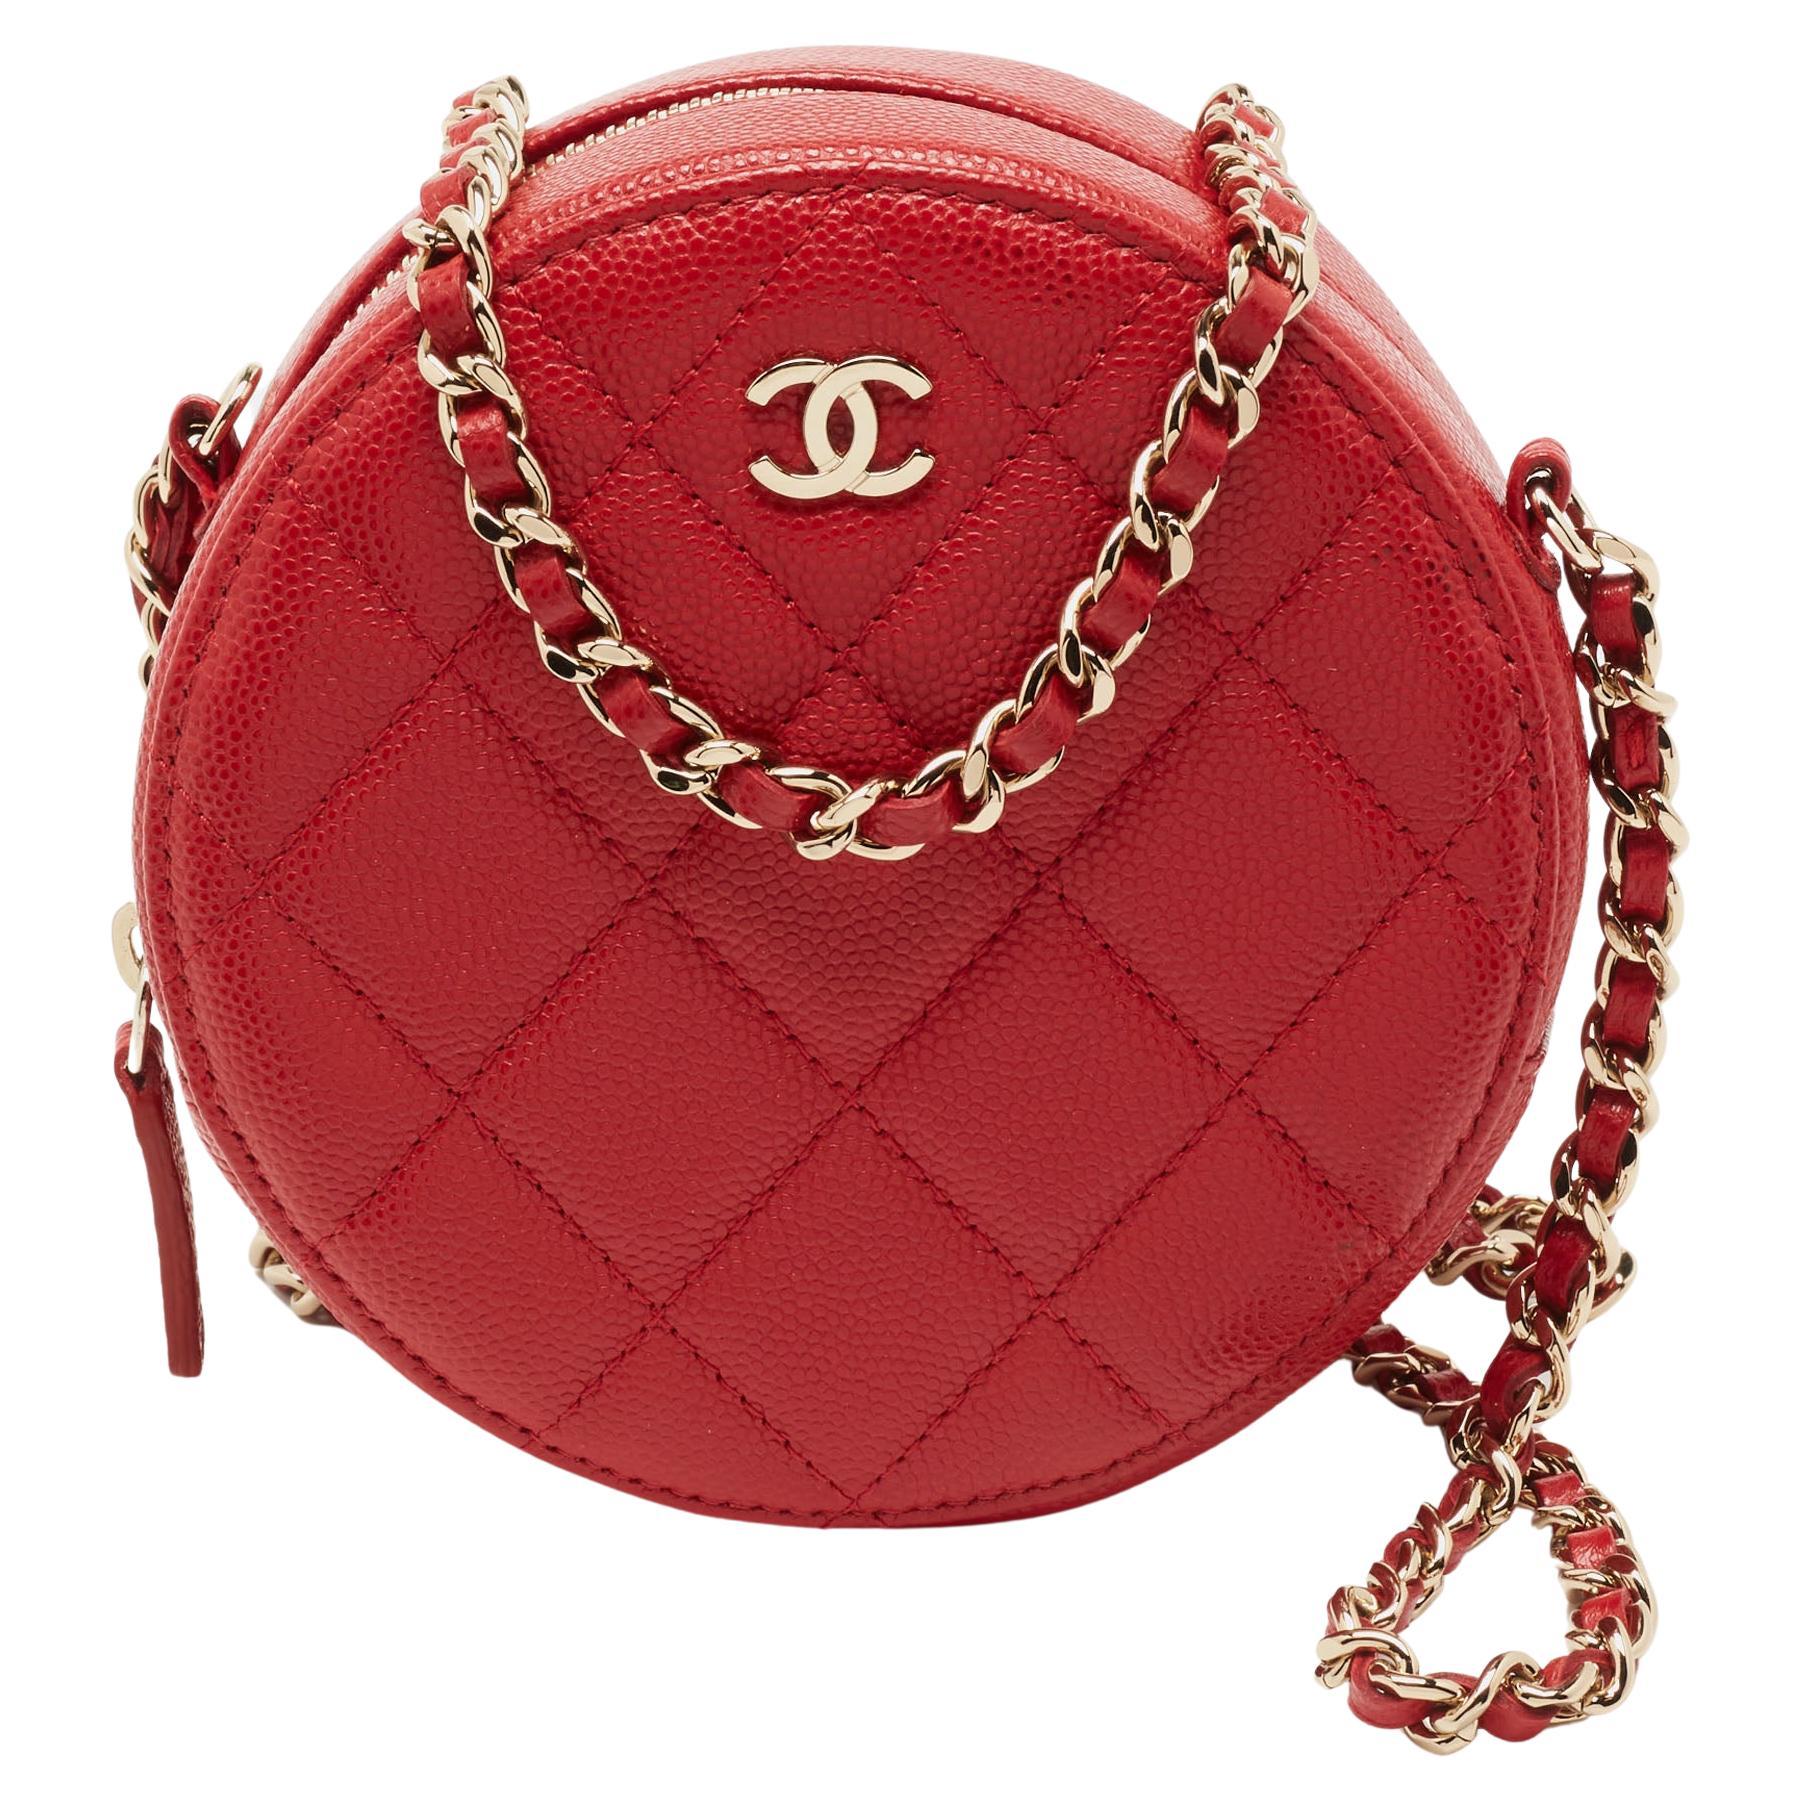 Chanel Quilted Chain Crossbody Shoulder Bag Red Caviar Skin 3171276 67830